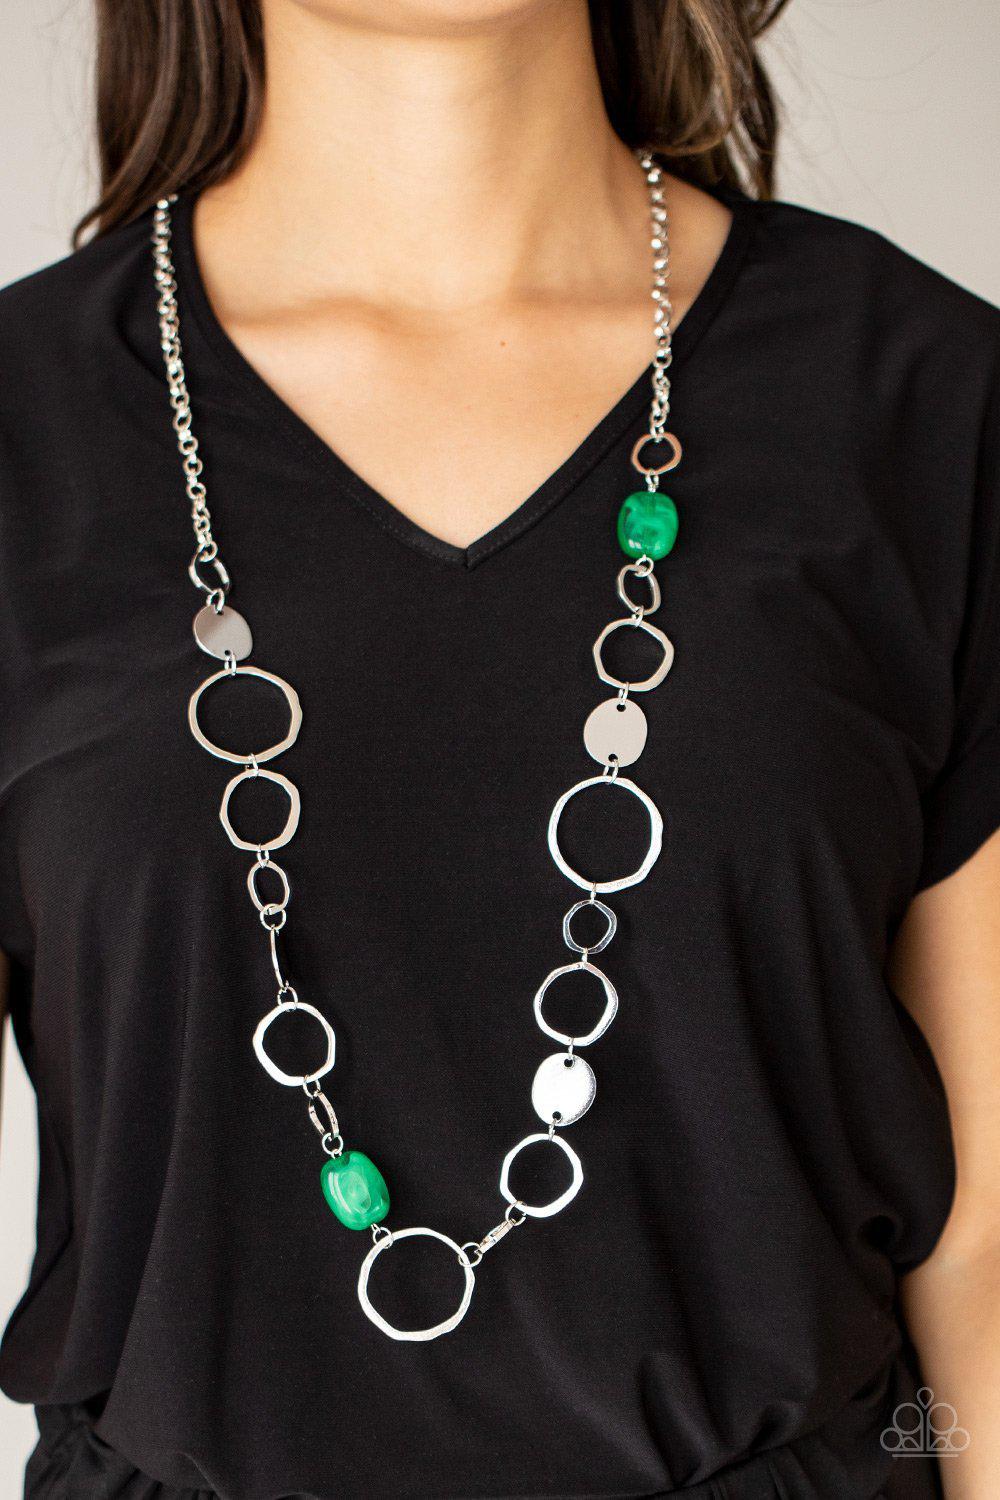 Colorful Combo Green and Silver Necklace - Paparazzi Accessories- lightbox - CarasShop.com - $5 Jewelry by Cara Jewels